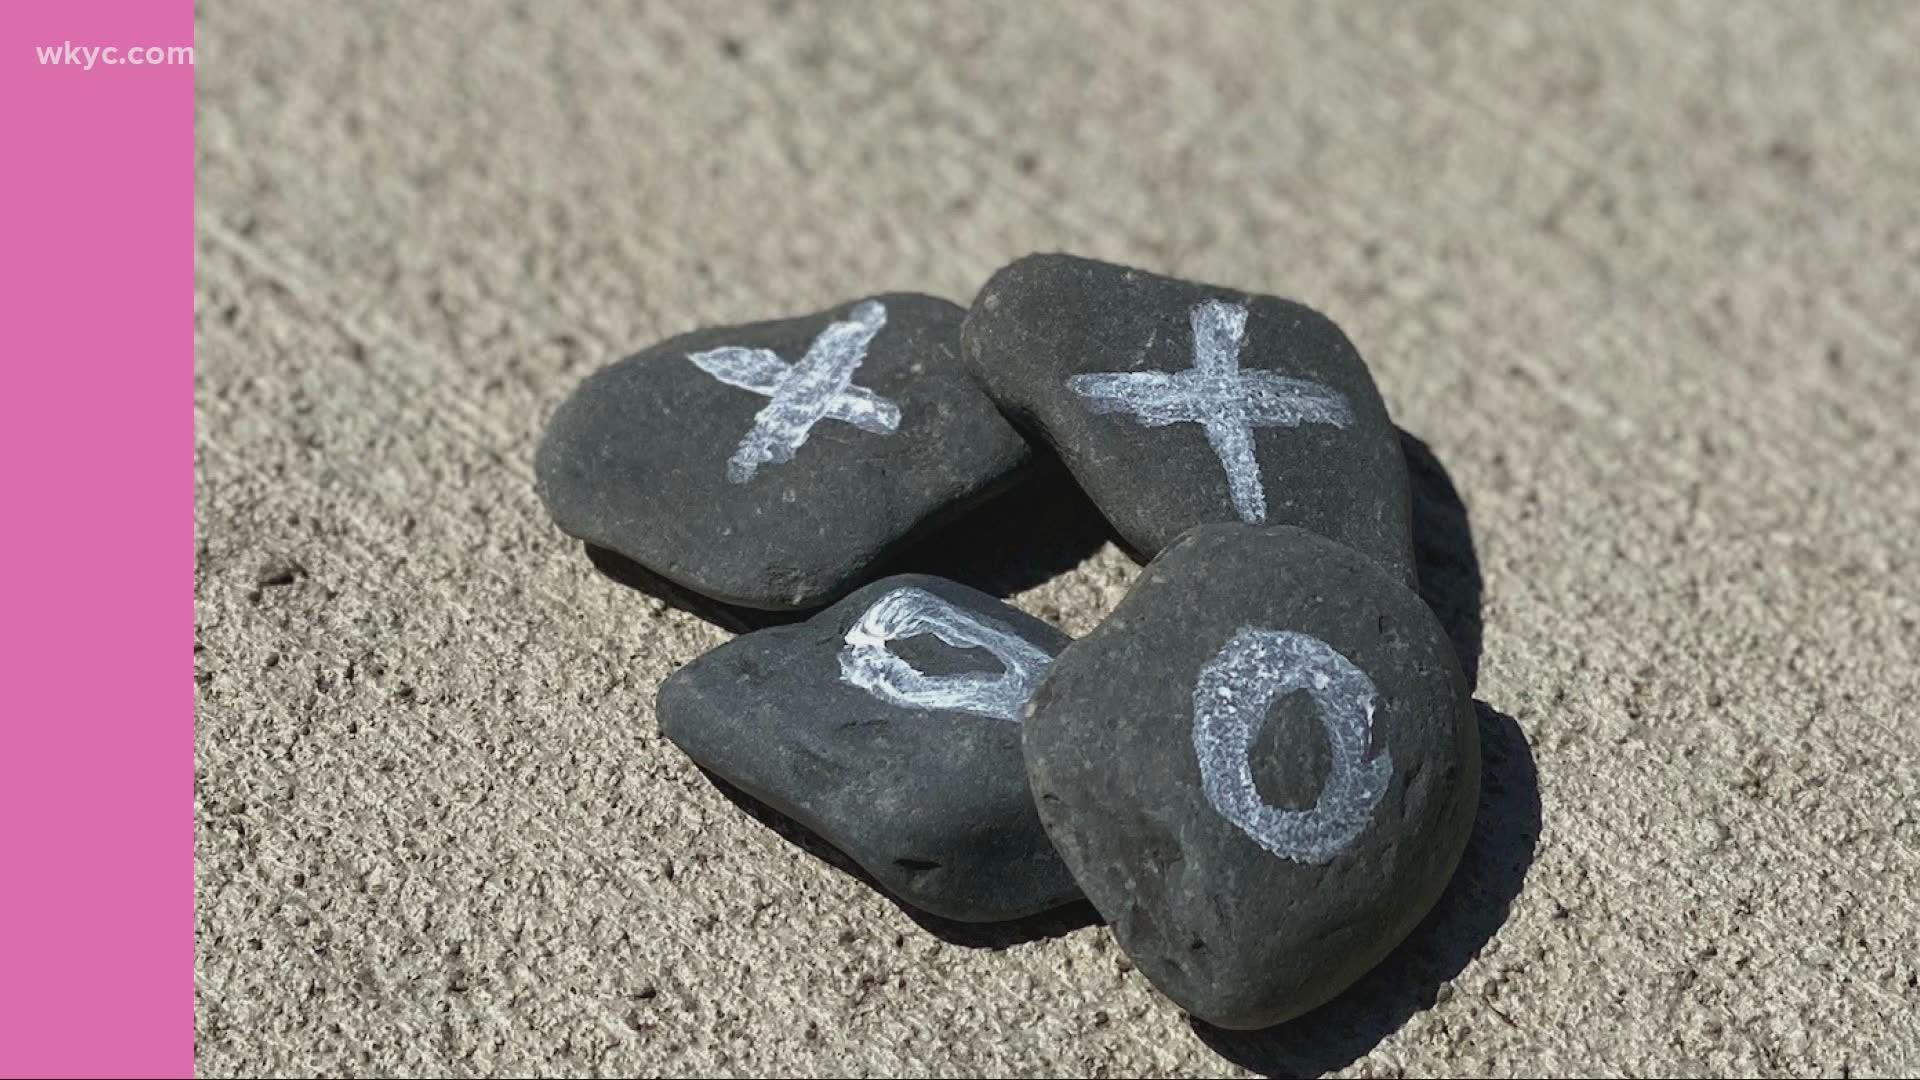 With the weather getting nicer, kids will want to get outside! Maureen Kyle shows us how to create tic-tac toe rocks to play inside or out and use their creativity.